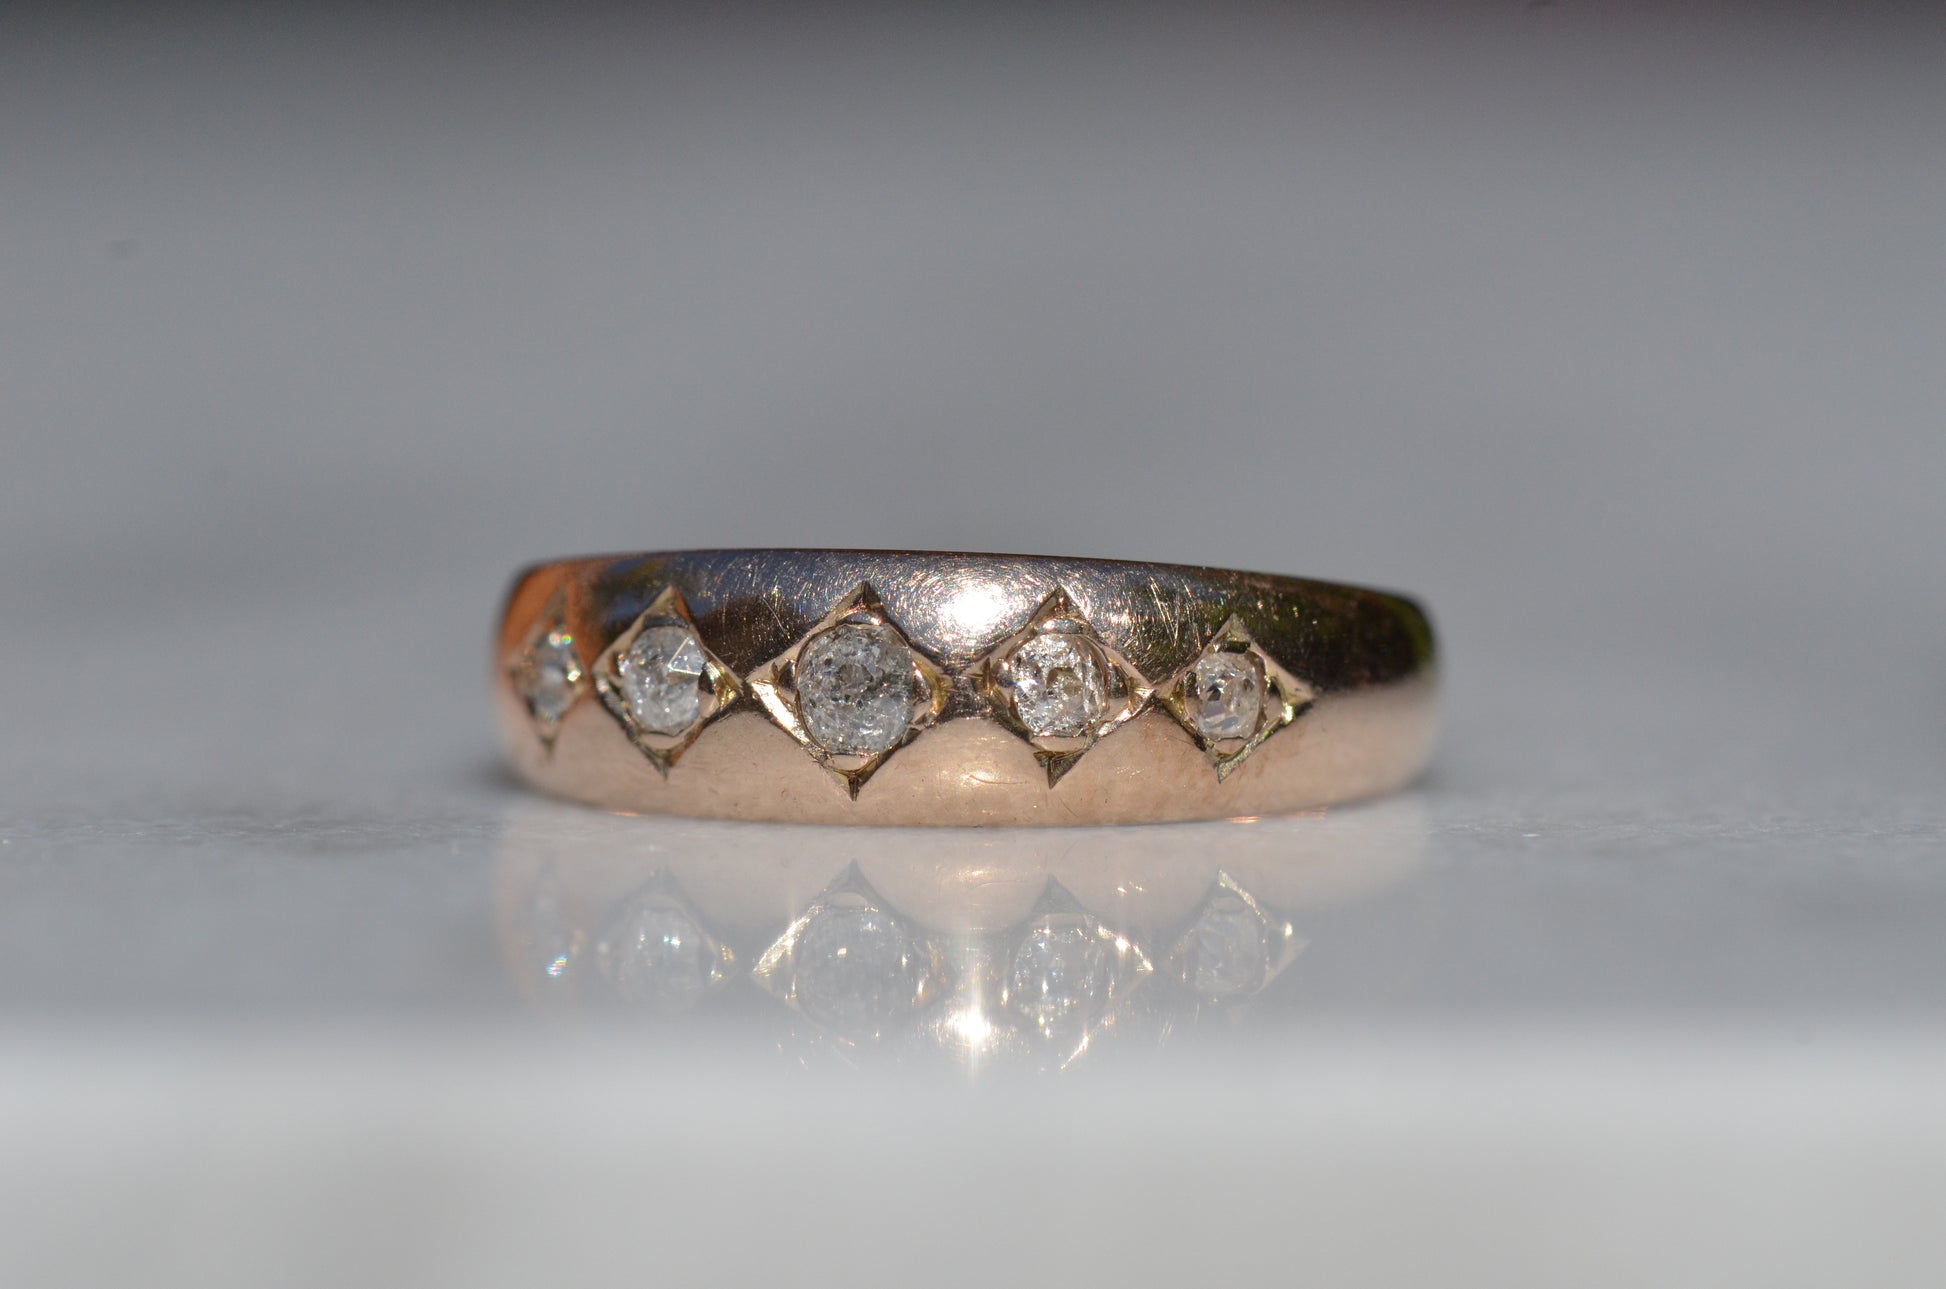 A tightly-cropped macro shot of the Victorian ring, showing the hand-cut diamond-shaped frames that hold each cushion-shaped stone. The old mine cut diamonds have internal fractures and inclusions but still sparkle in the direct sun, and the gold is weathered from a century of wear. The ring is facing slightly to the left, to better see the detail of the tapering side stones.